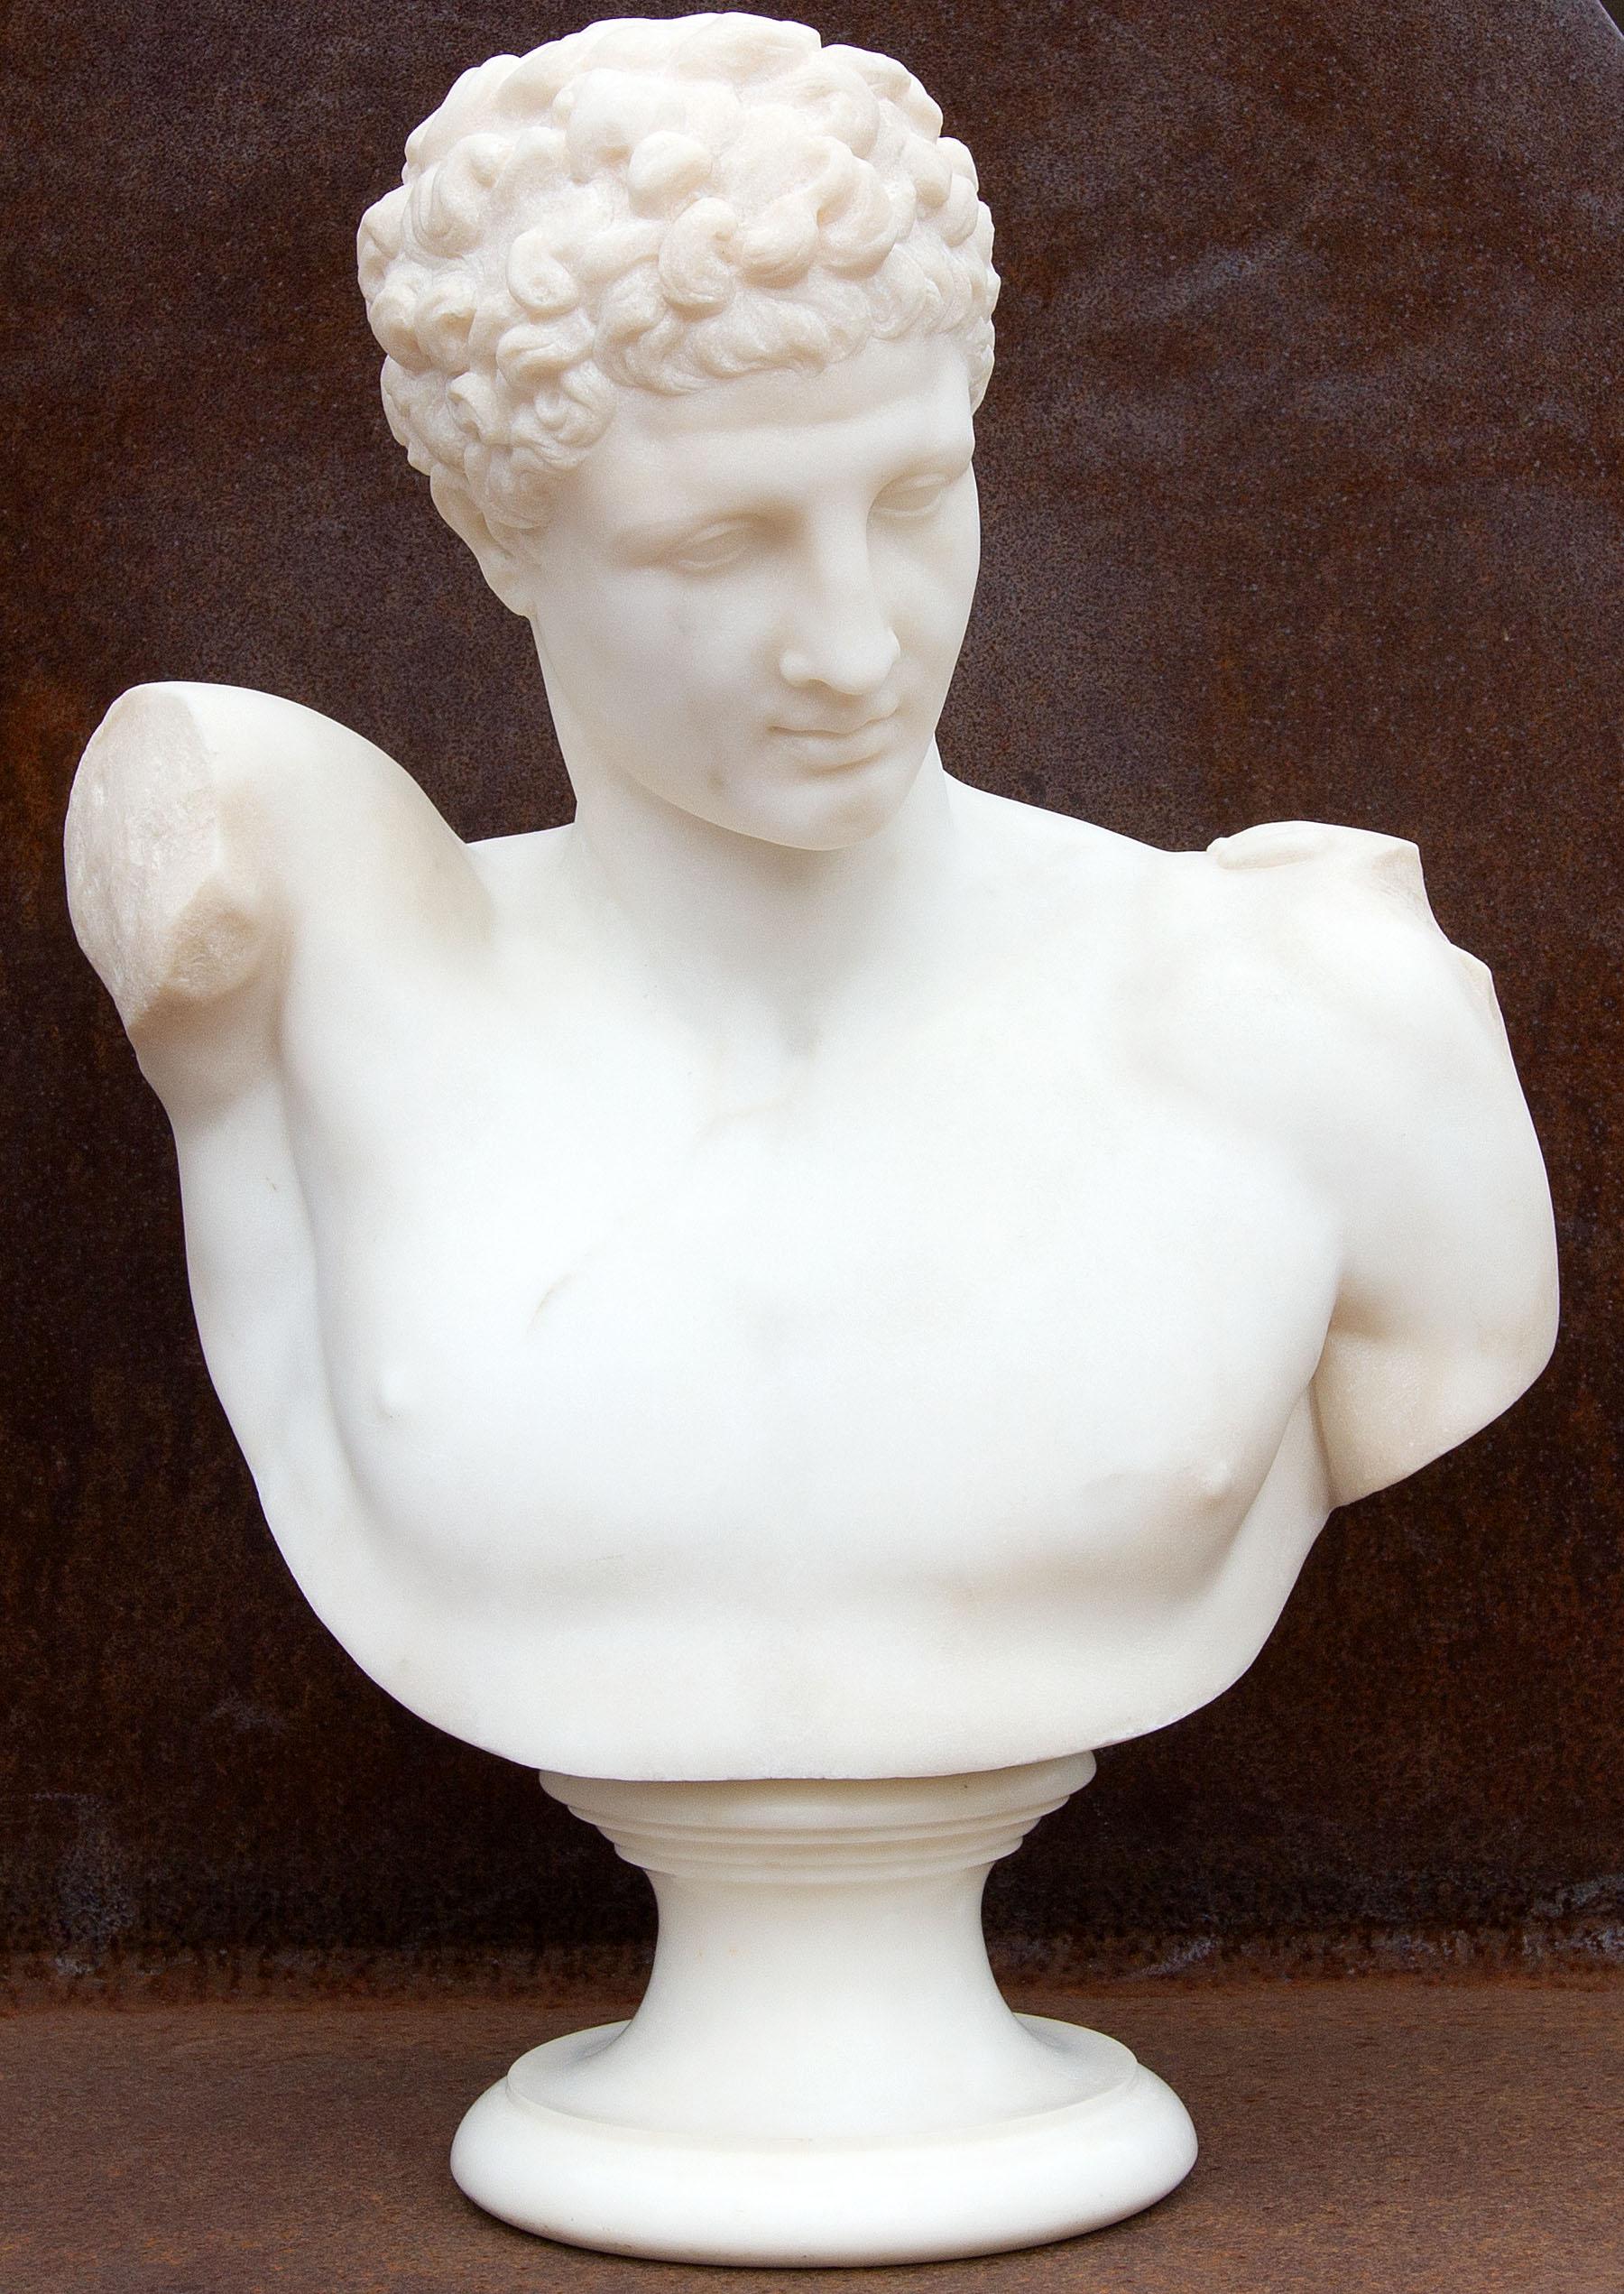 19th century carved marble bust of the Greek god Hermes also known as the Roman god Mercury. An exceptionally fine carving.